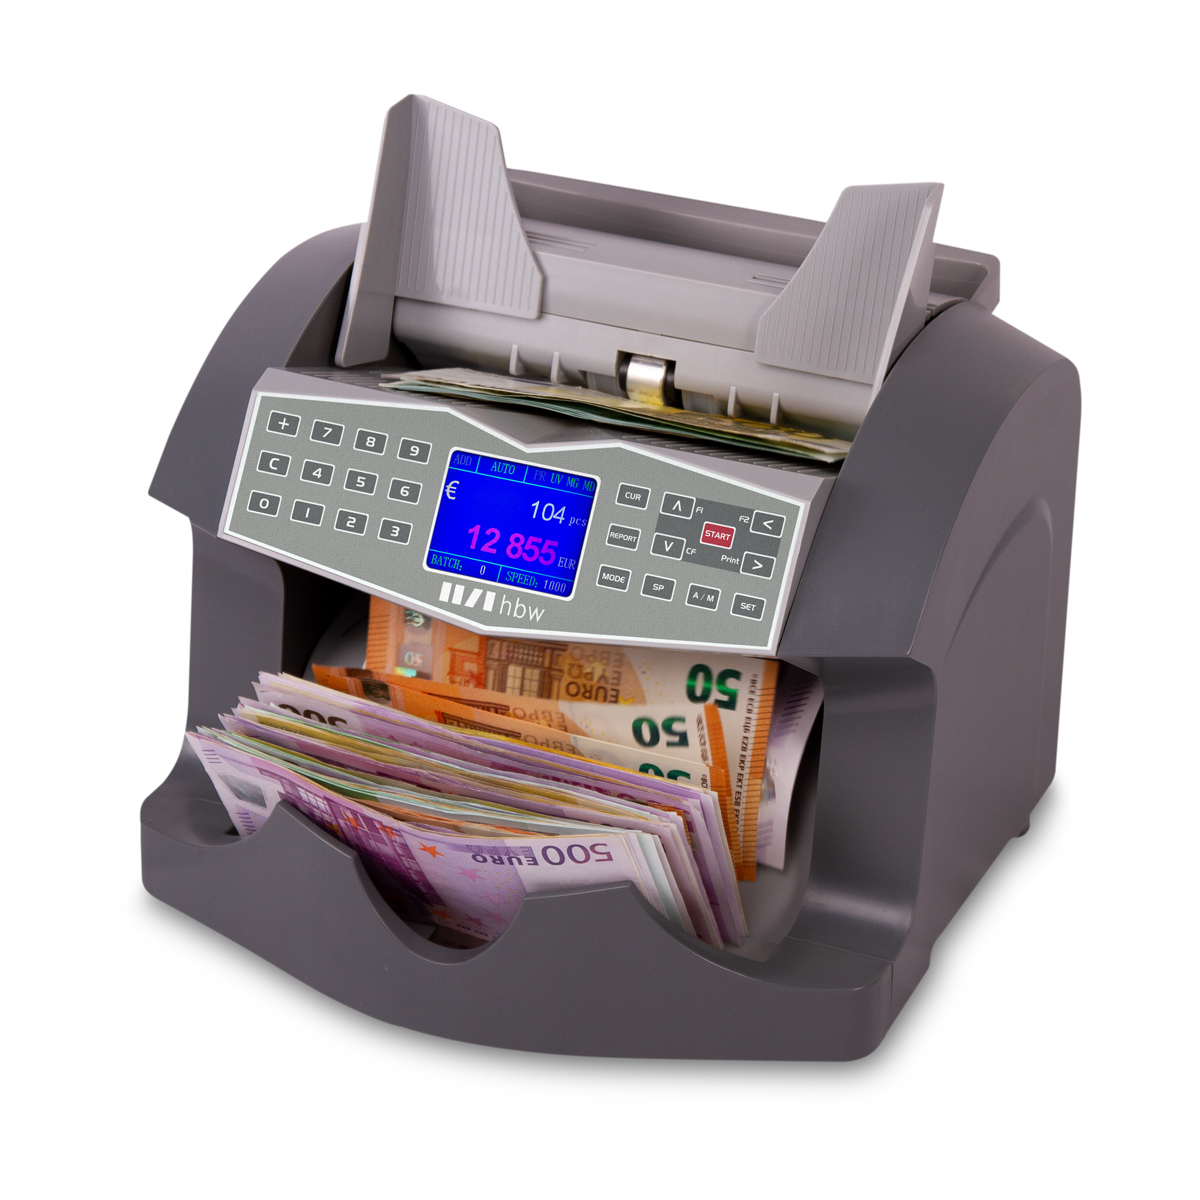 Banknote counters hbw VC 6040 Euro